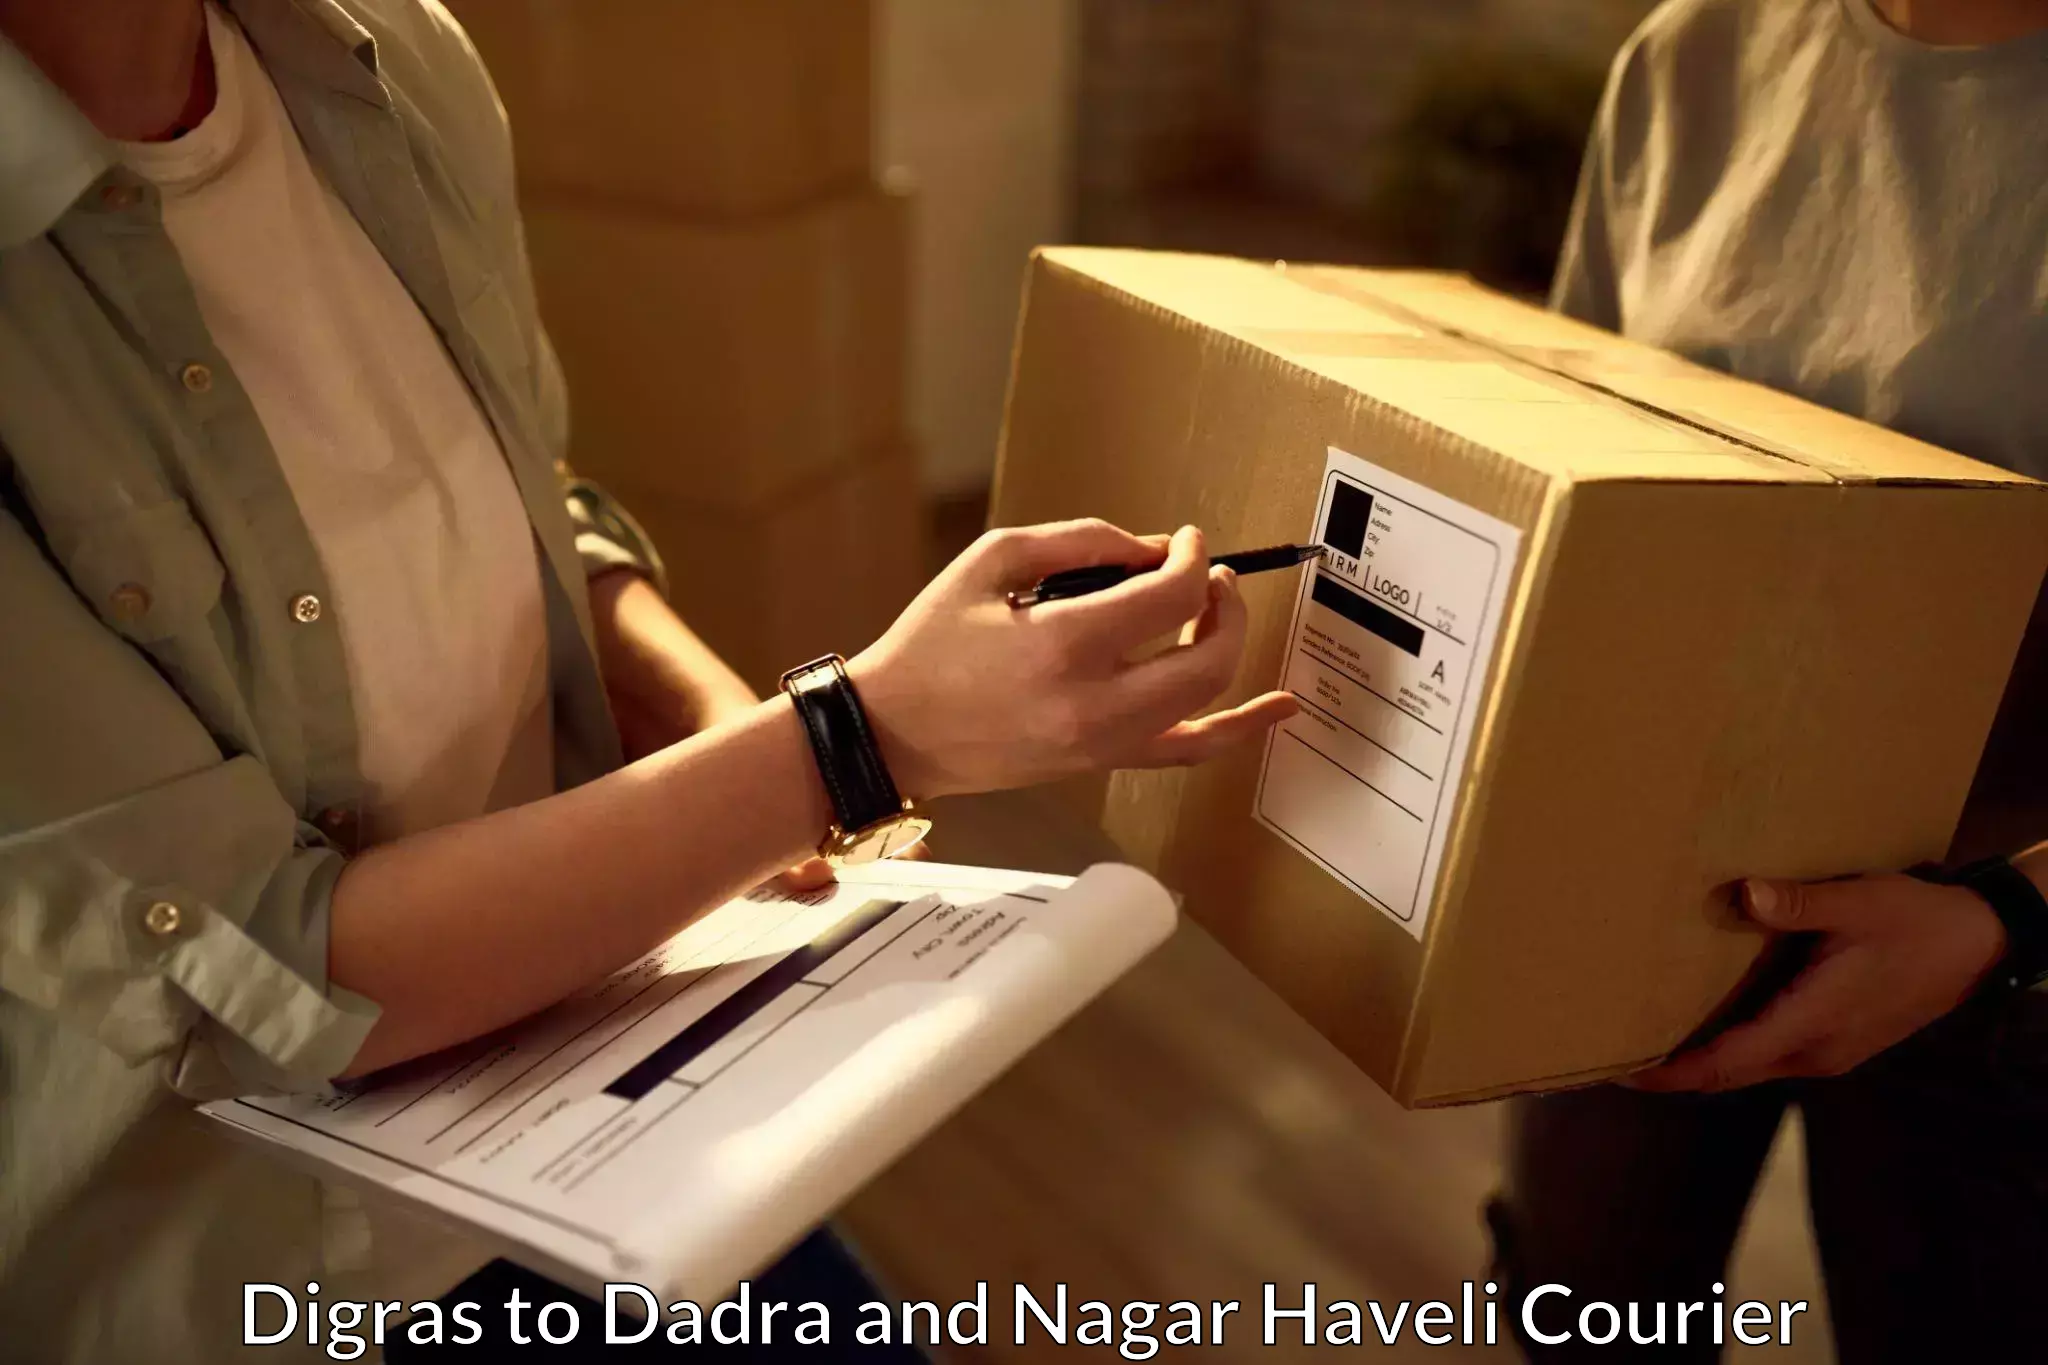 Next-day delivery options Digras to Dadra and Nagar Haveli